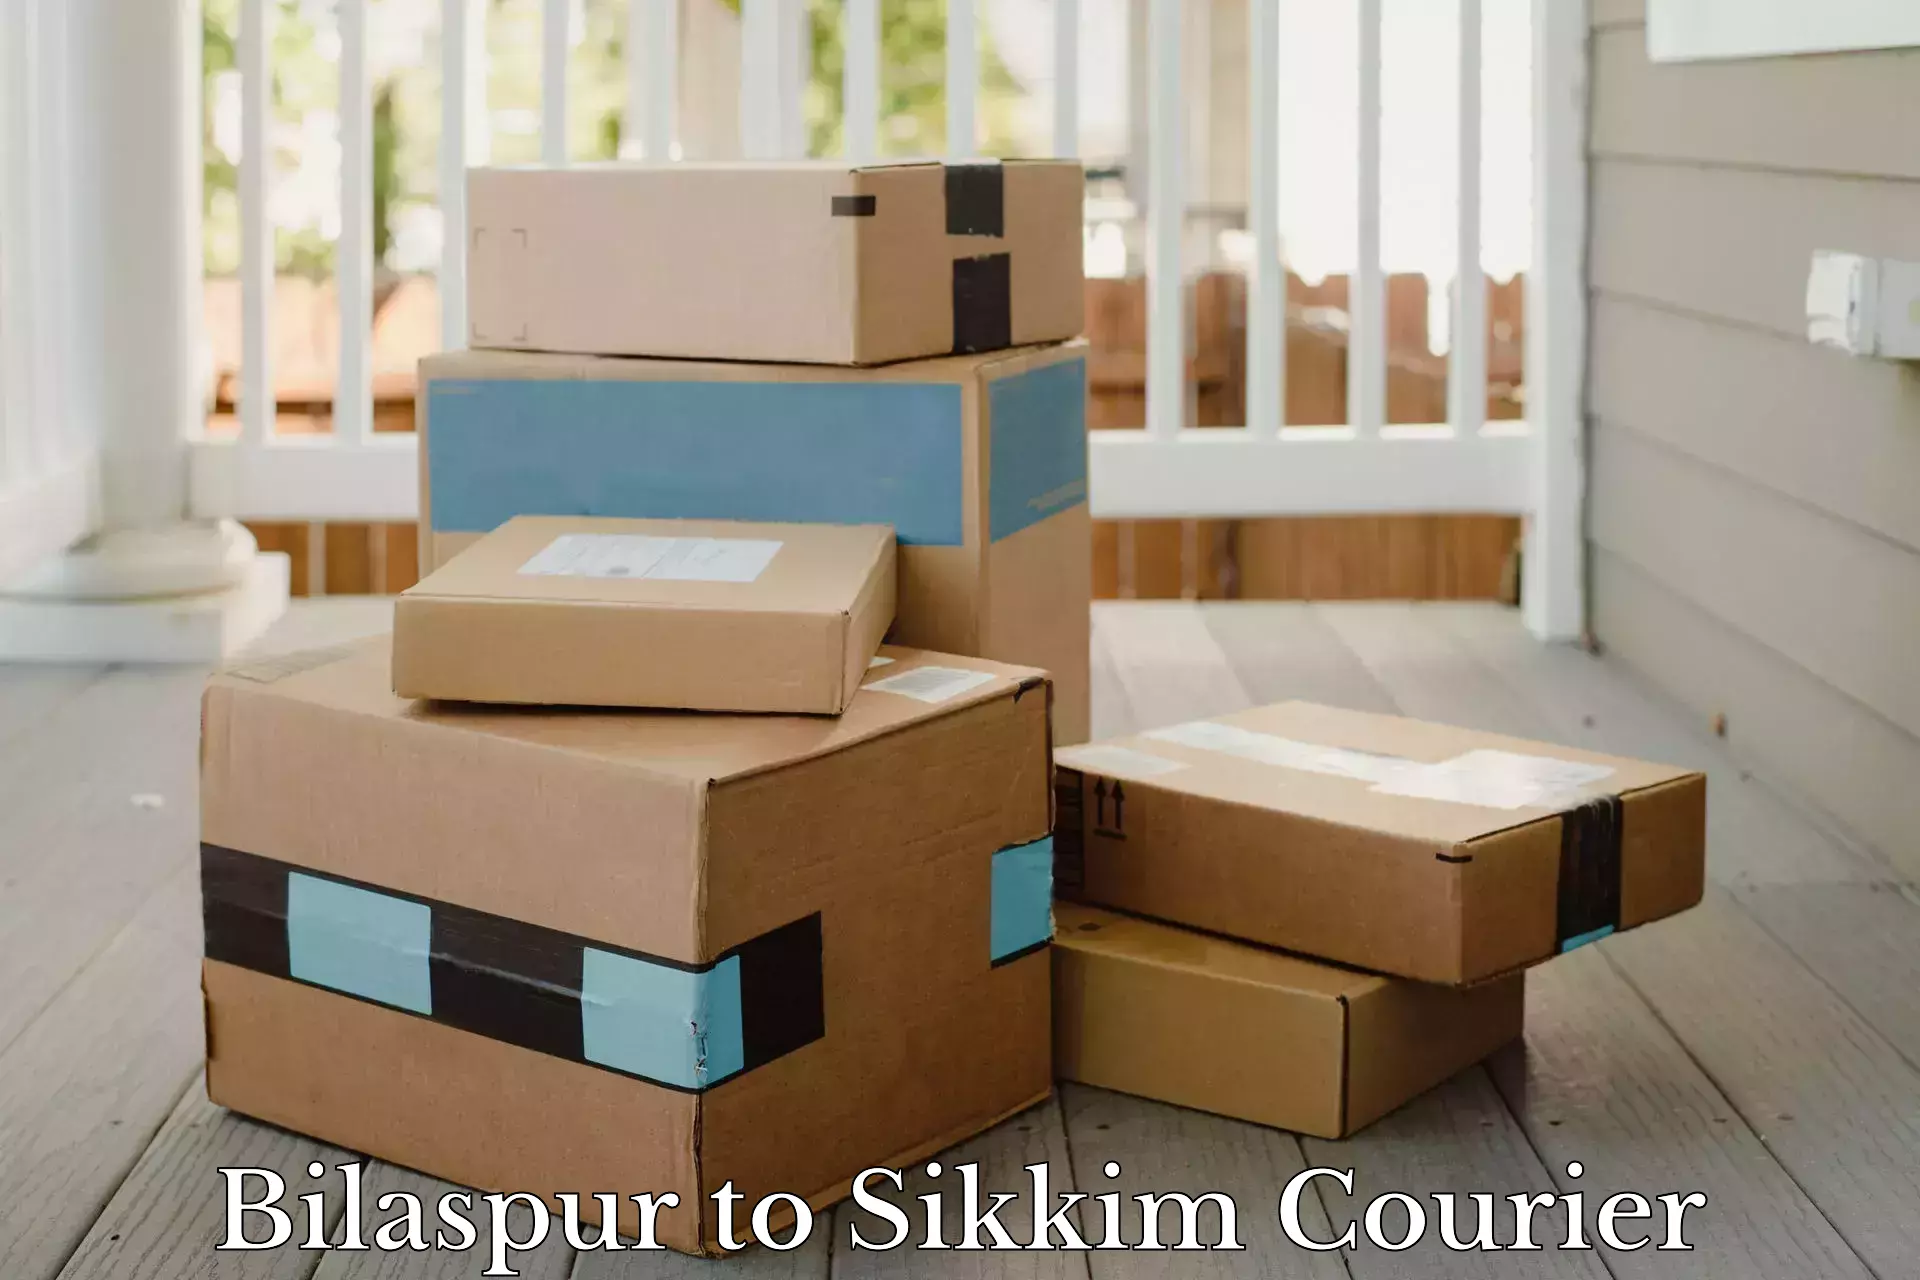 Smart parcel tracking Bilaspur to Rangpo